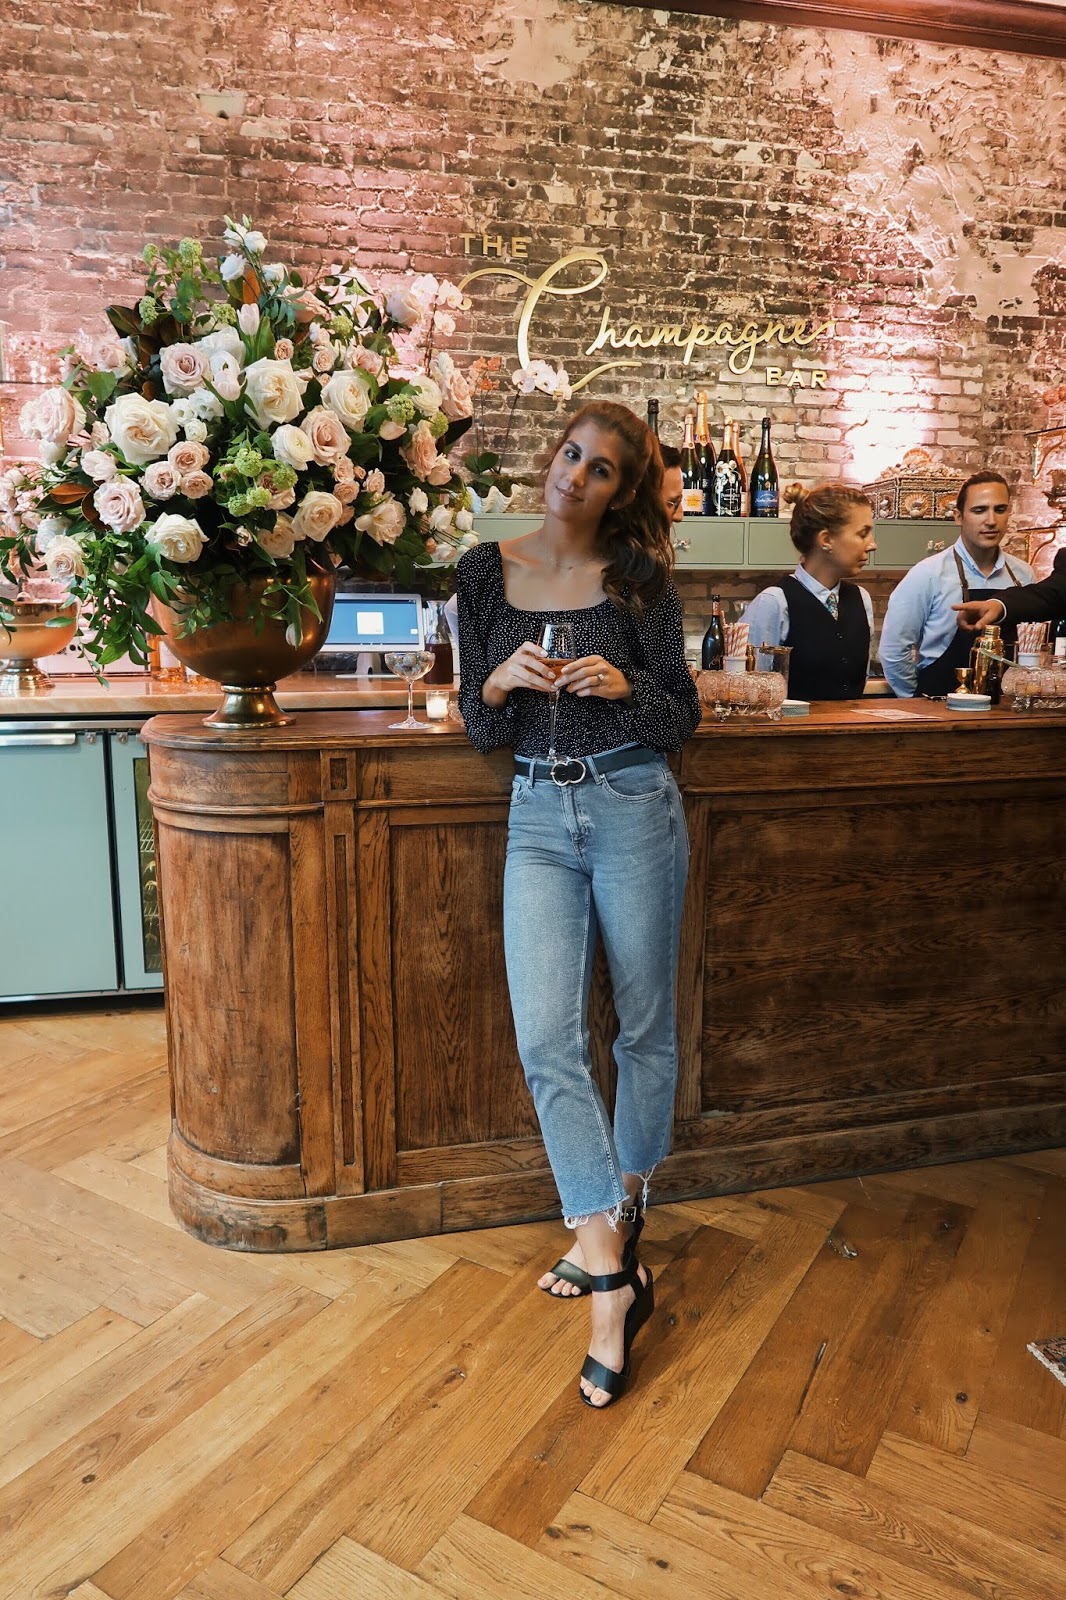 Oxford Exchange's New Champagne Bar Takes Cocktail Hour to the Next Level